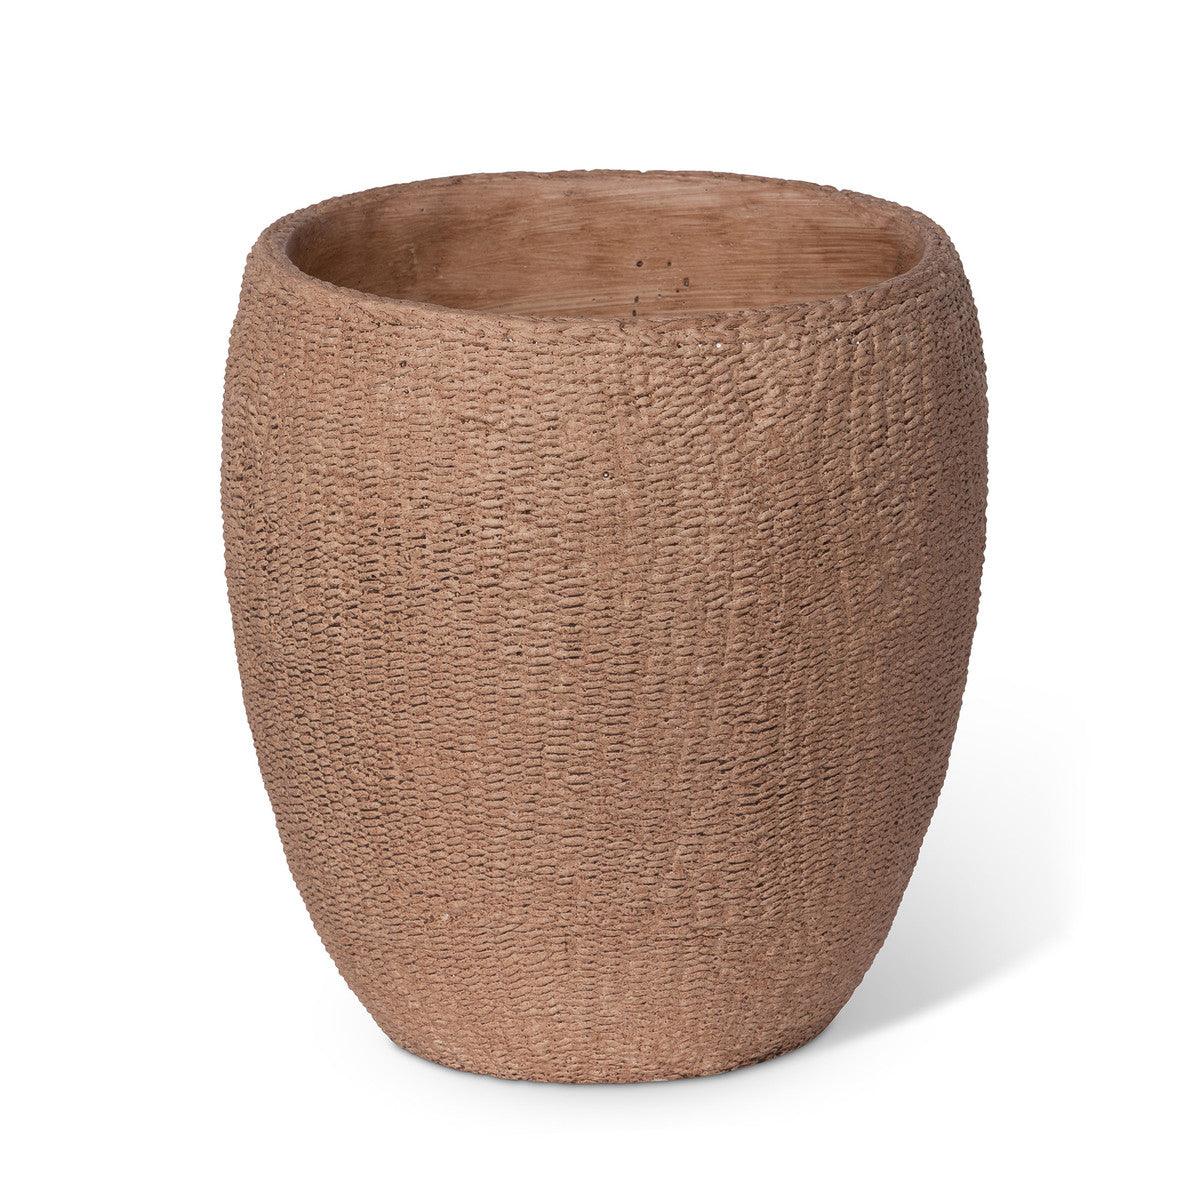 Seagrass Relief Pattern Cement Pot, 10" - Signastyle Boutique